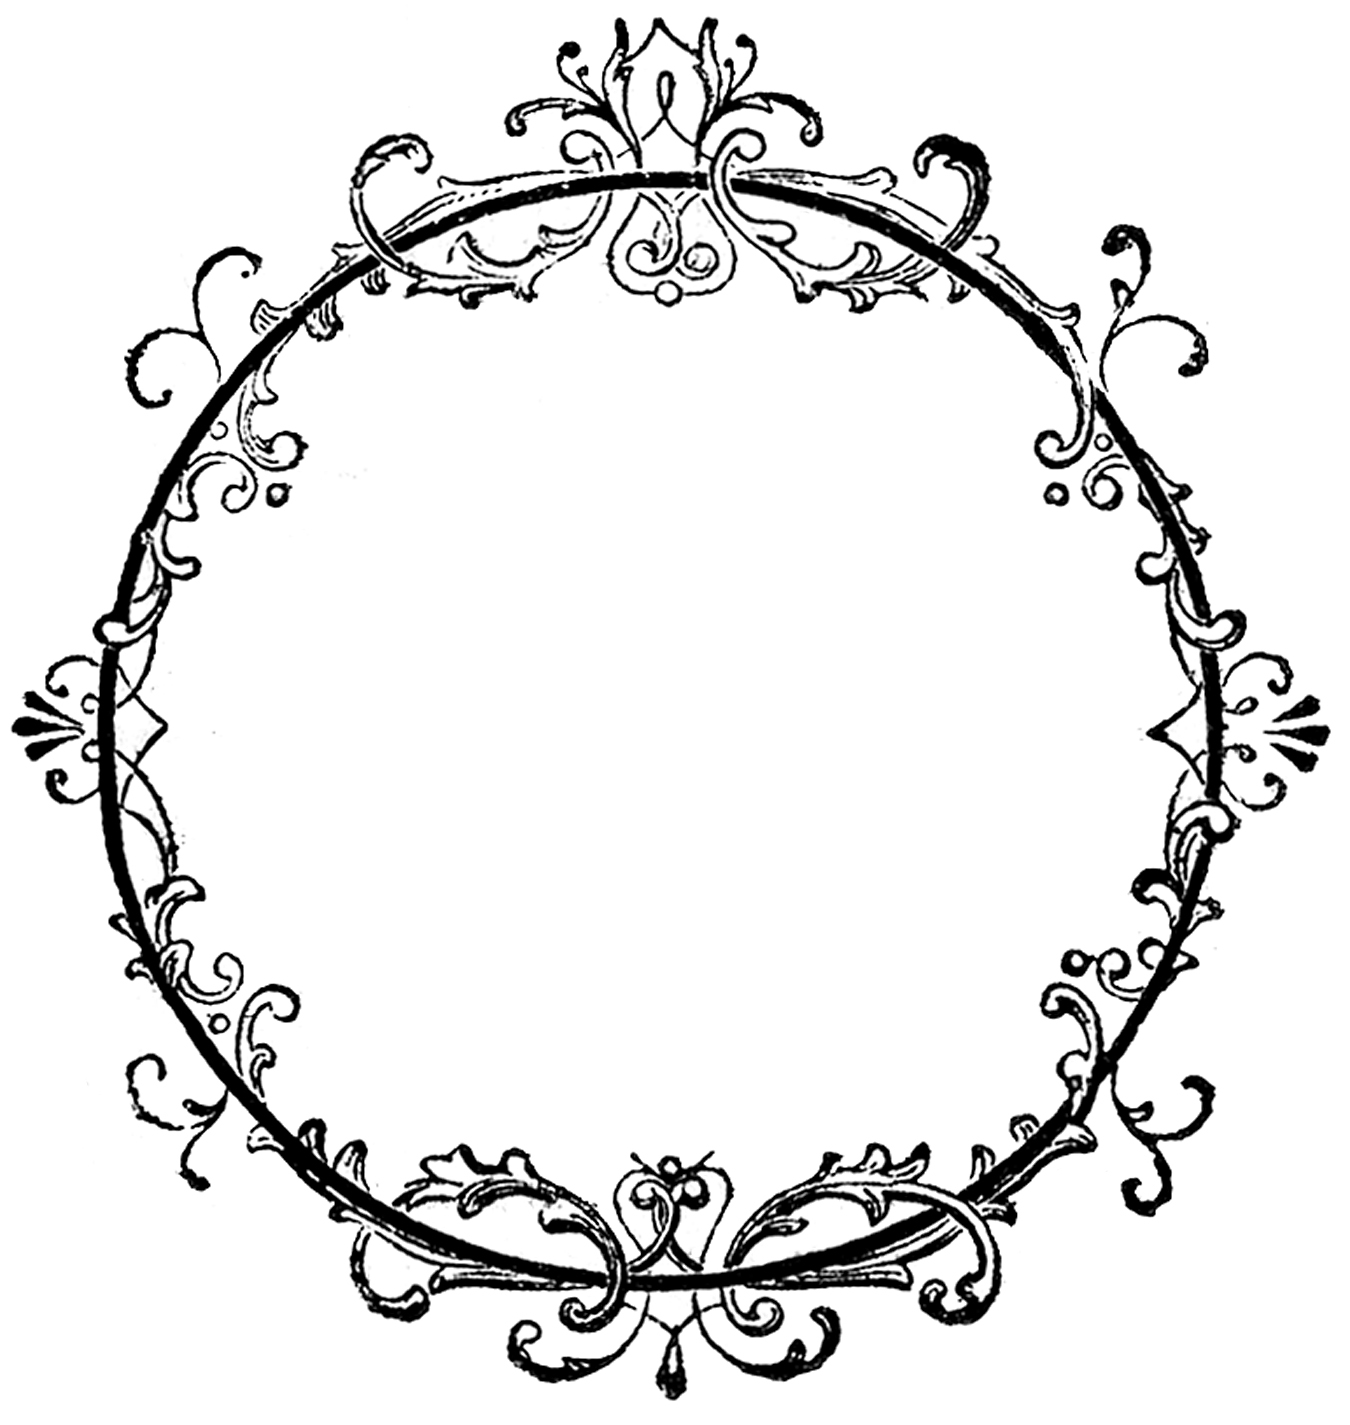 Fancy Oval Frame Clip Art | Clipart Panda - Free Clipart Images